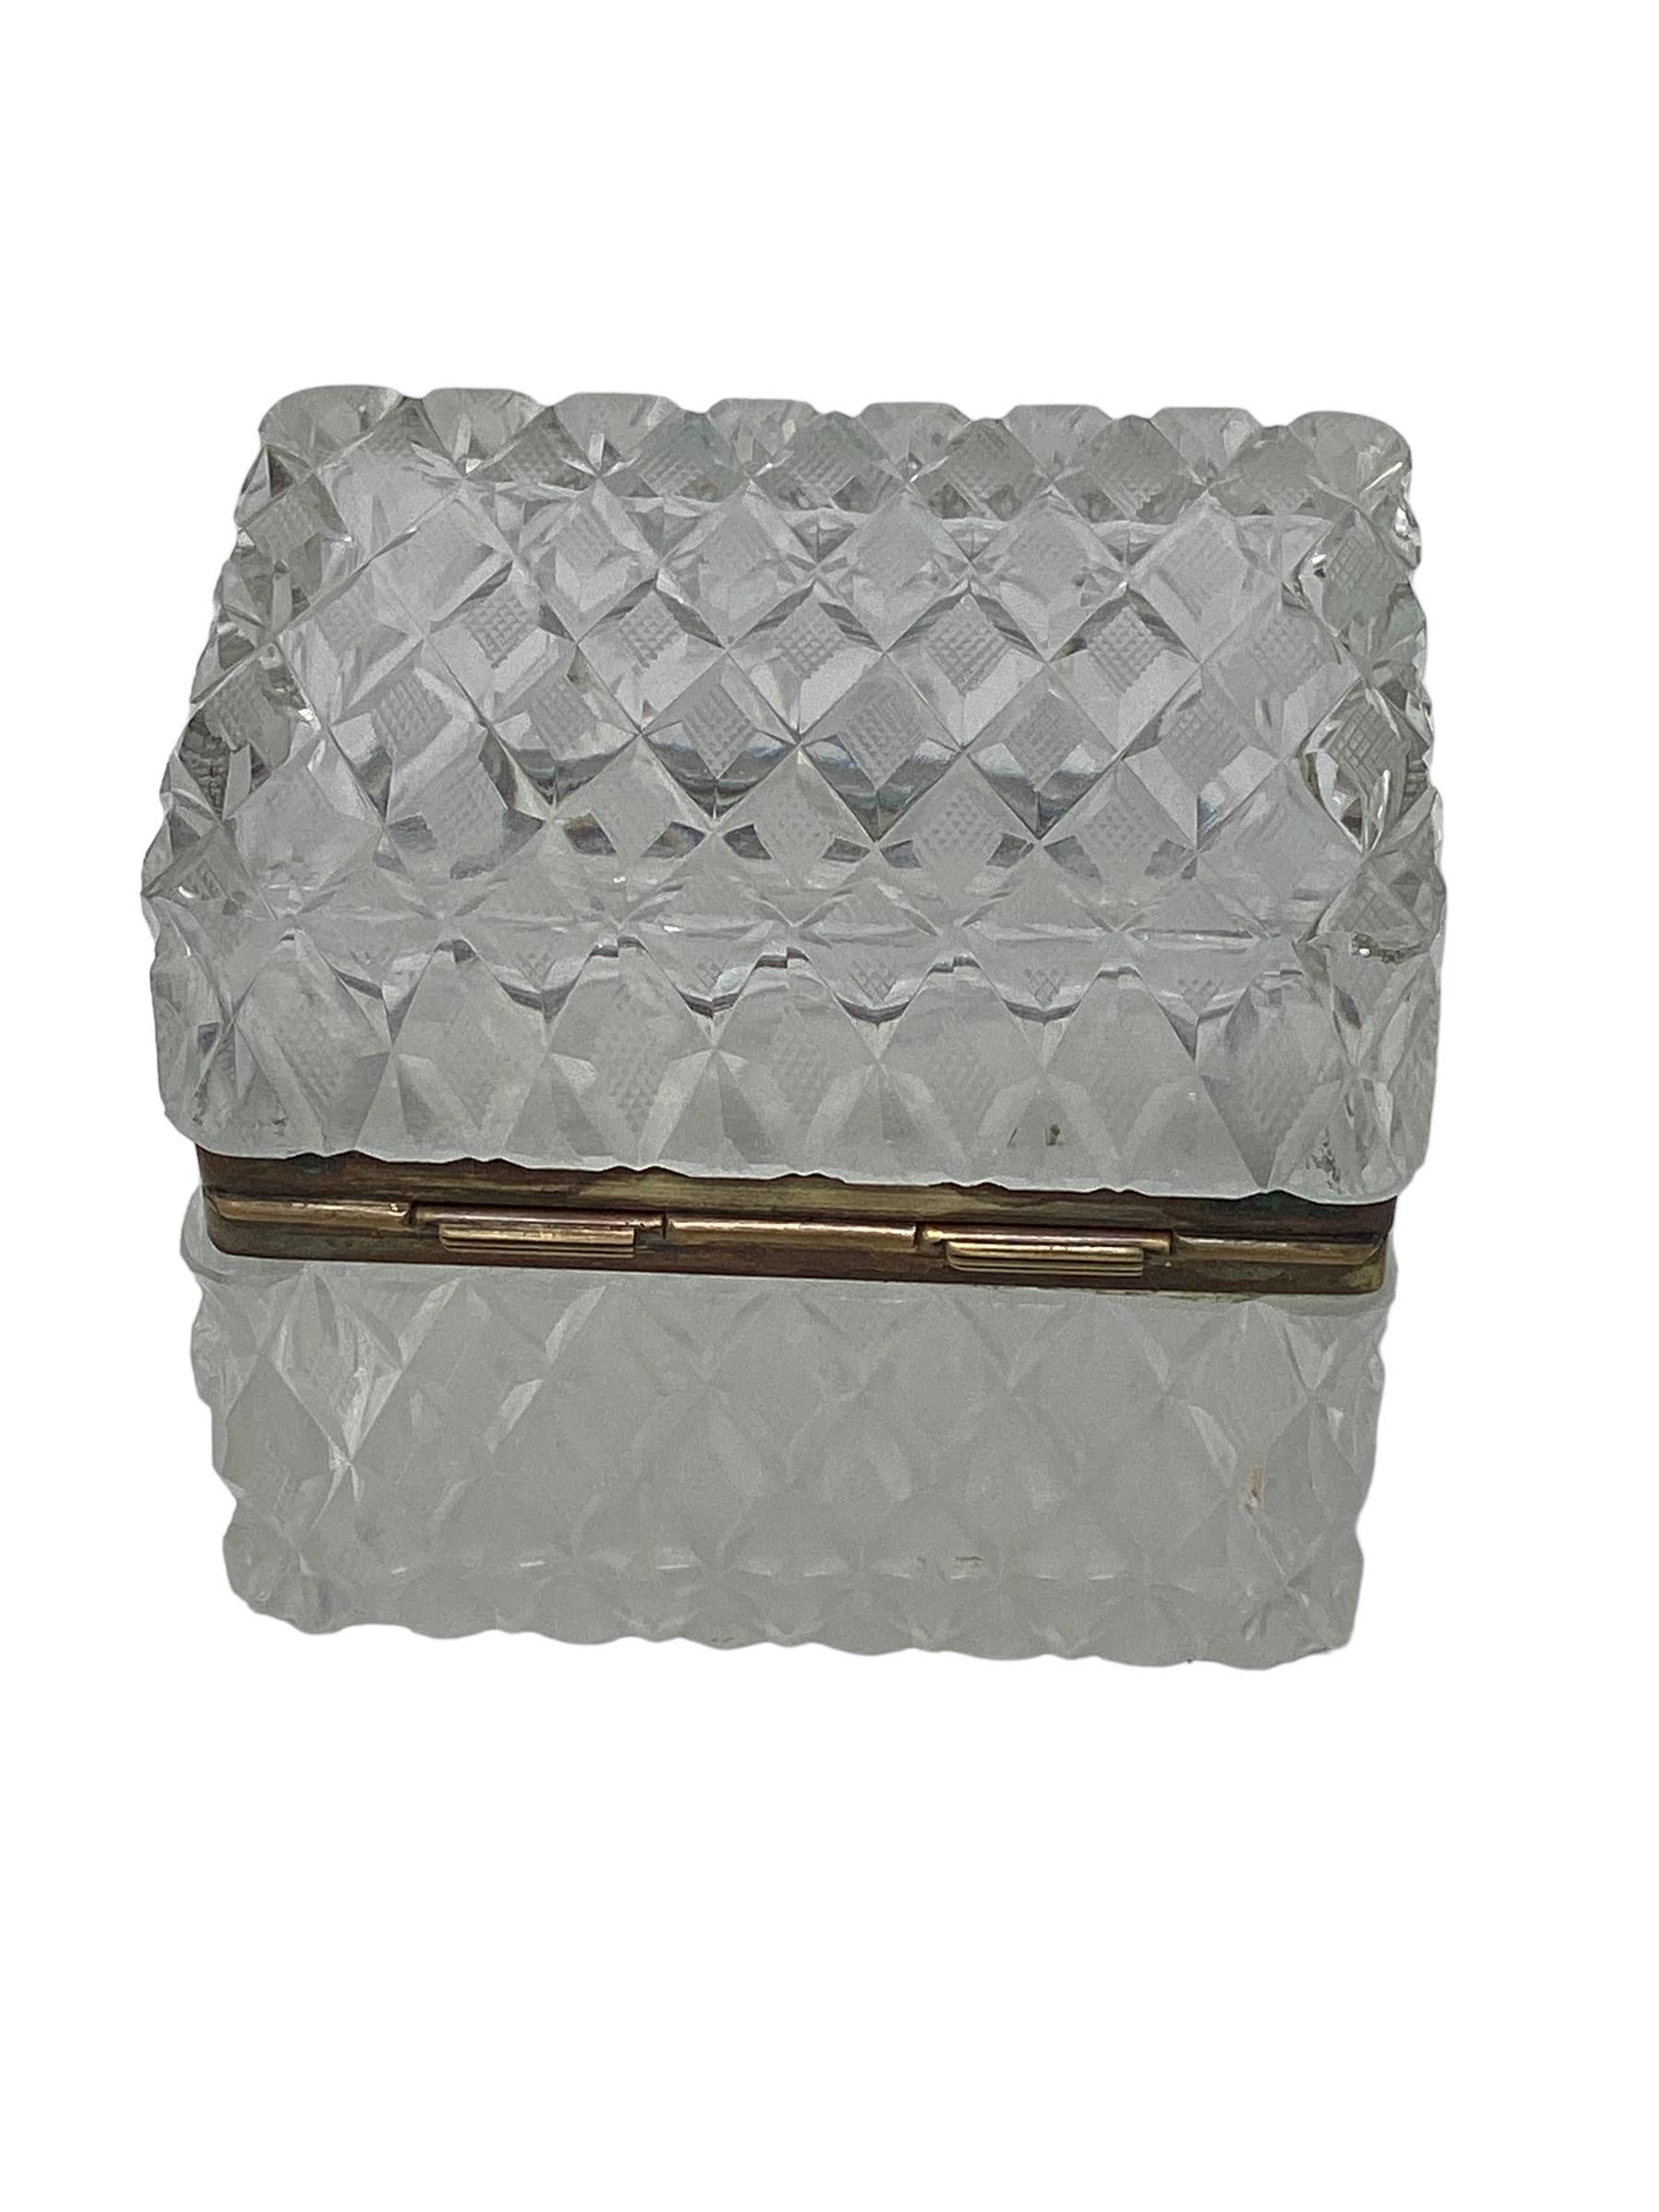 French Cut Crystal Box with Diamond Cut Pattern  In Good Condition For Sale In Chapel Hill, NC